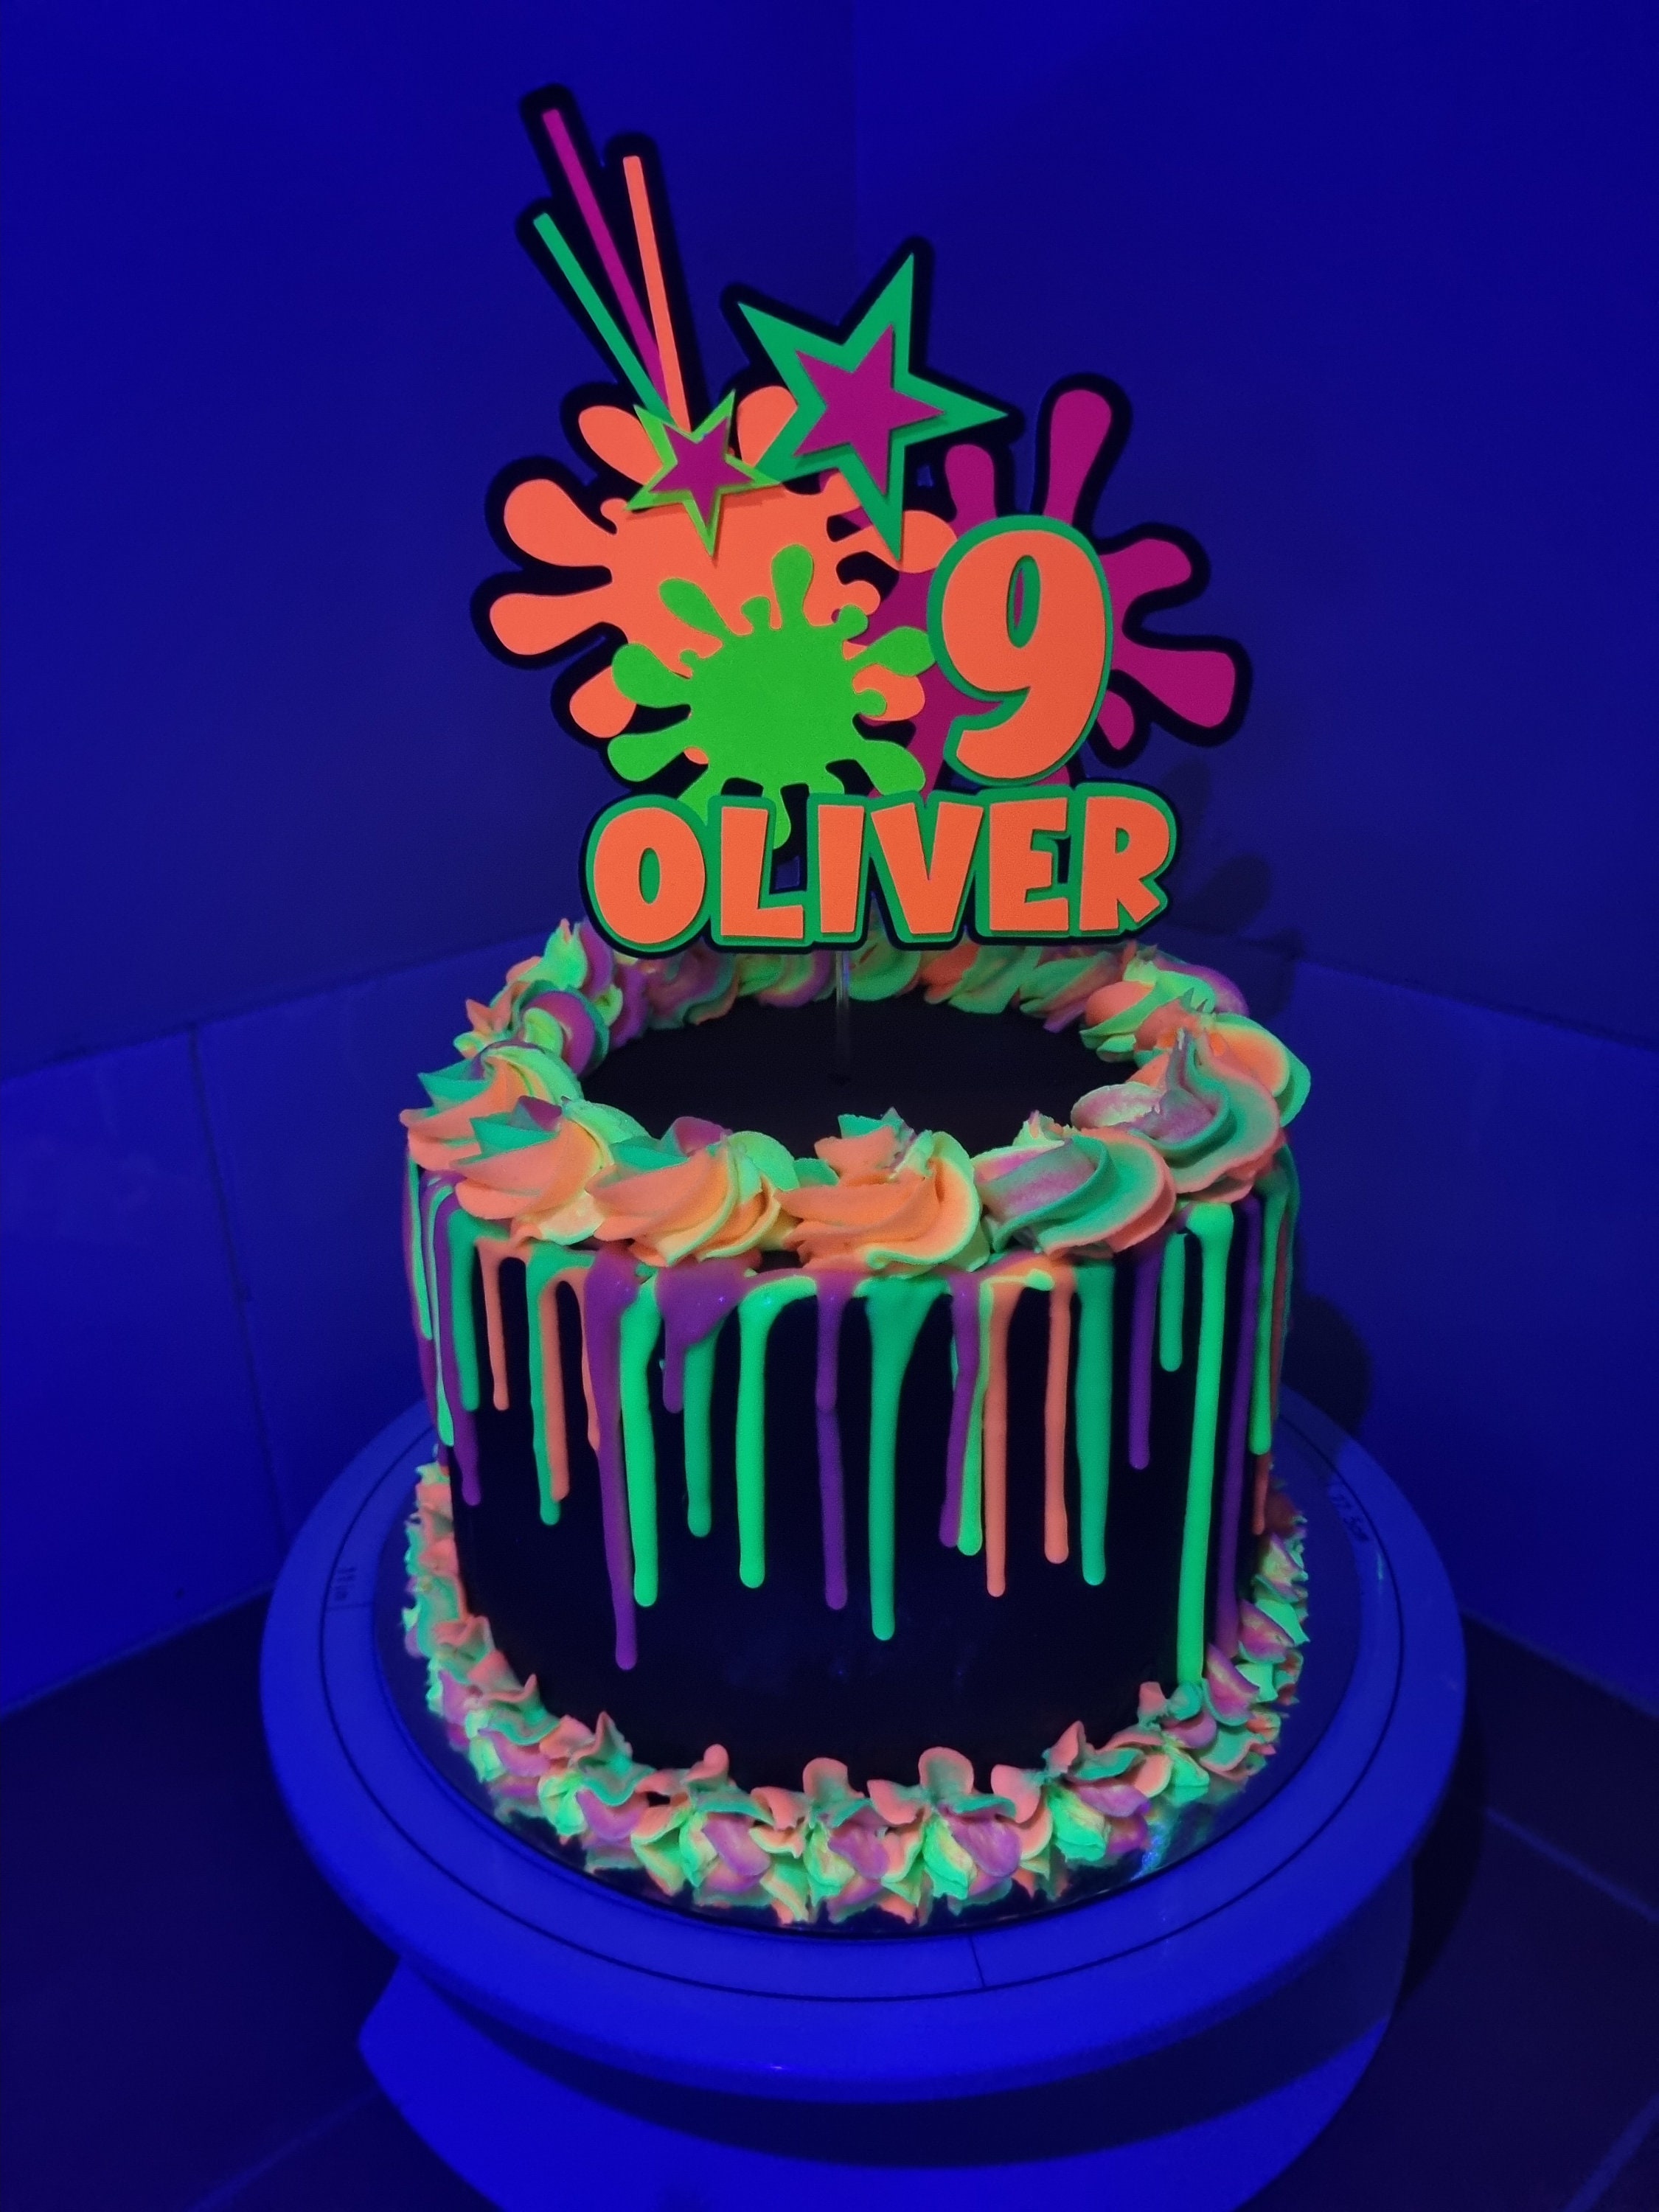 Buy Glow Party Cake Topper, Neon Birthday Cake Topper, Personalized Cake  Topper, UV Reflective Cake Decoration, Fluorescent Neon Cake Decor Online  in India 